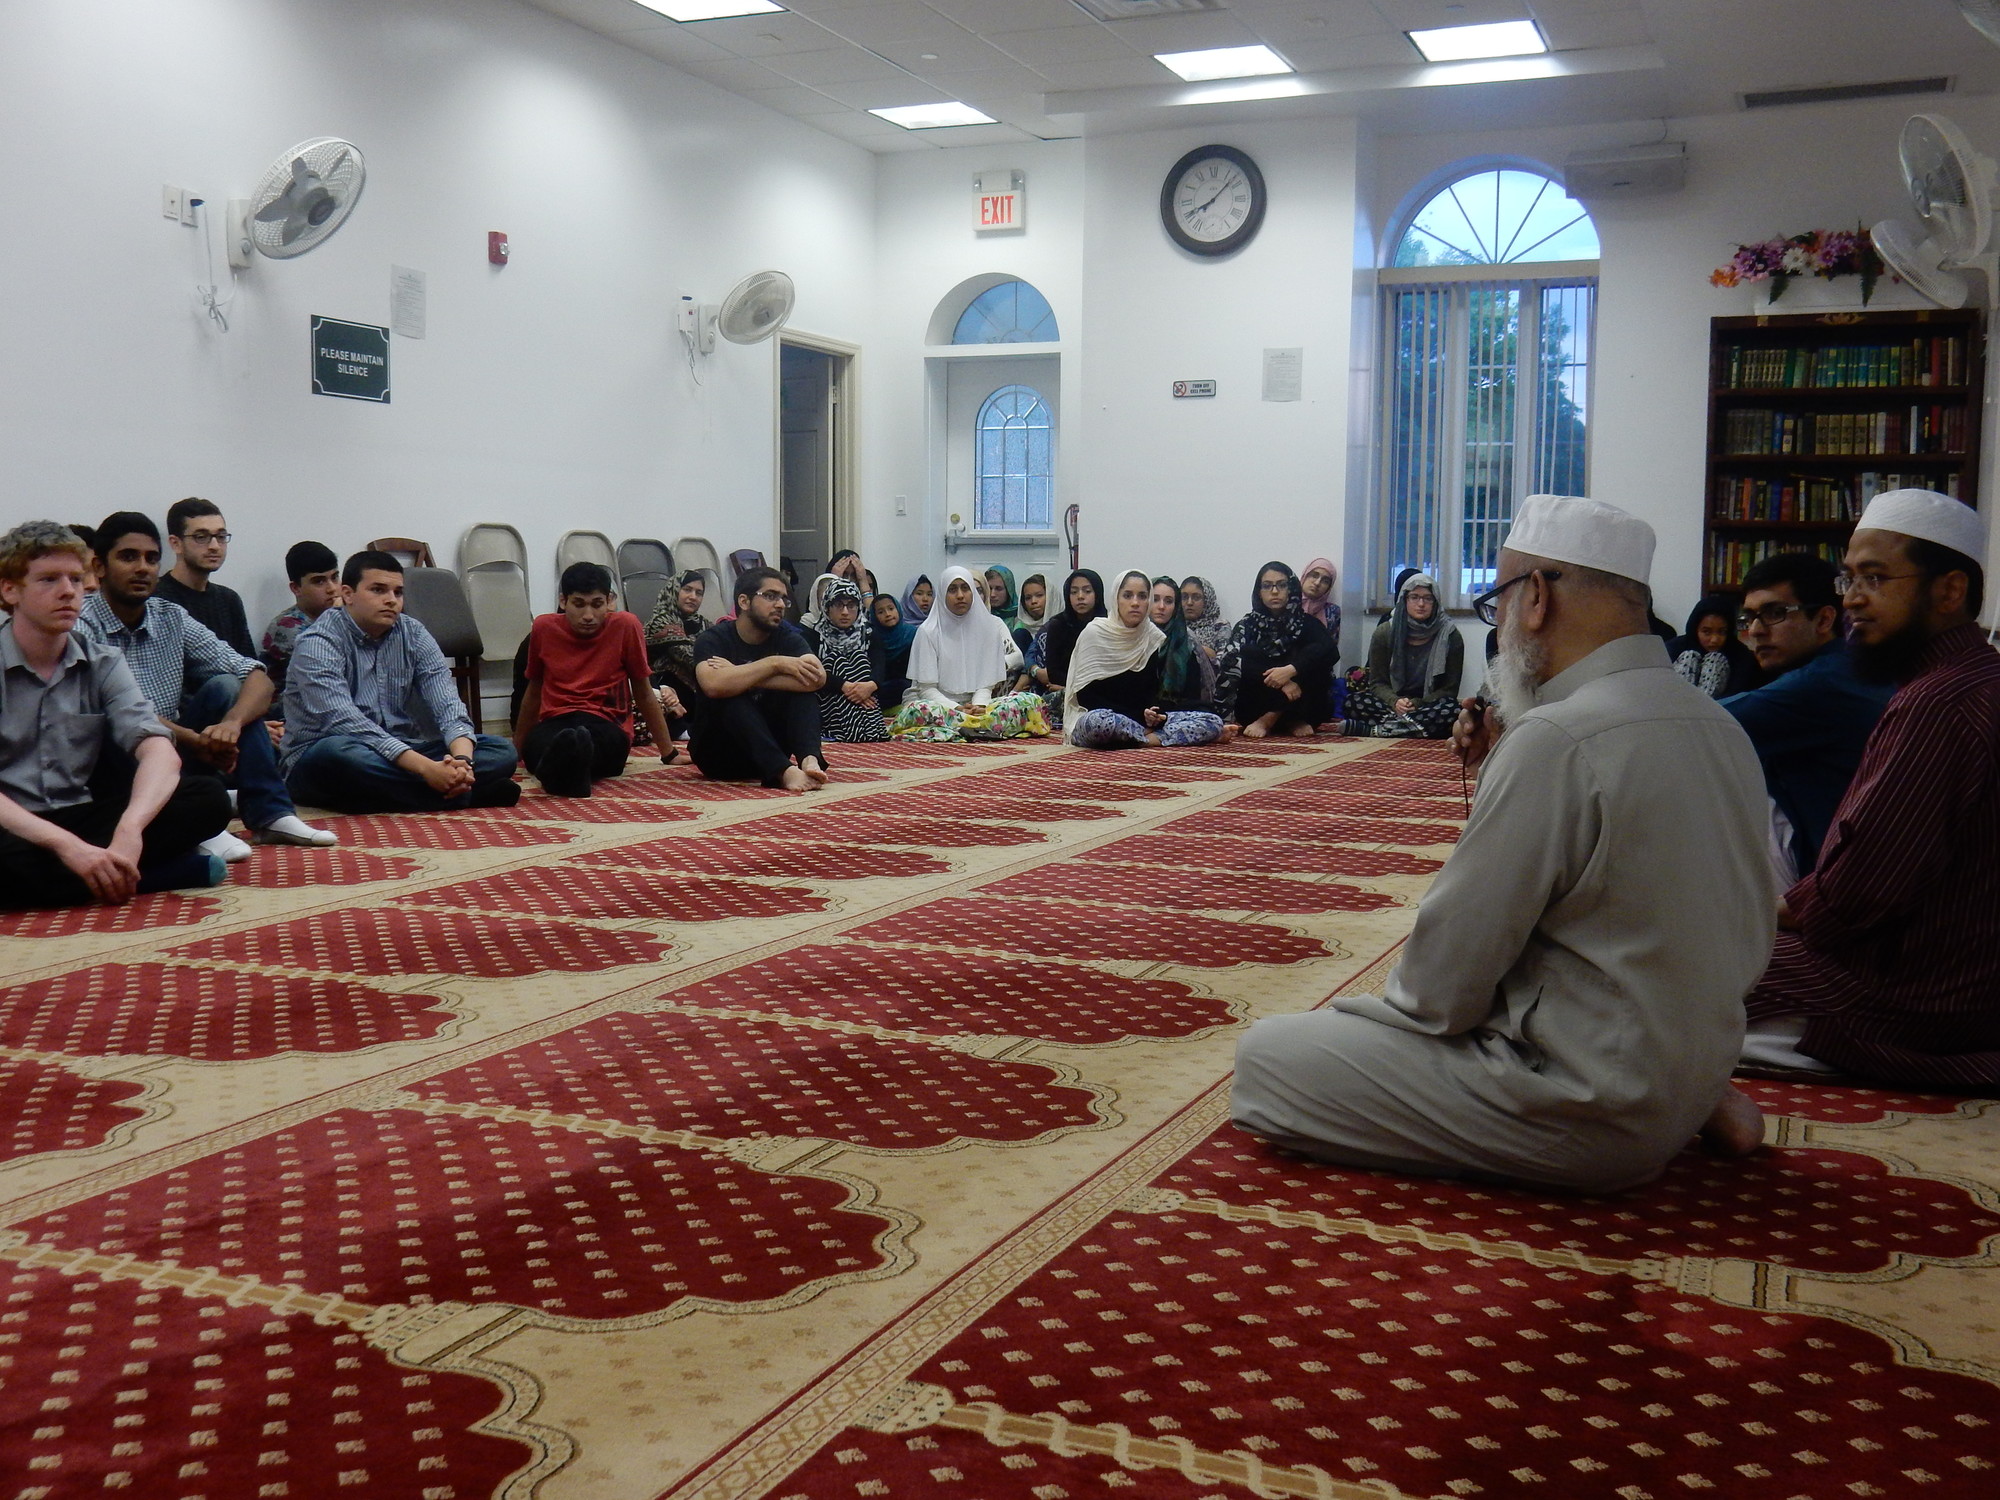 More than 60 local students gathered on June 22 at the Long Islamic Muslim Society to learn about Islam. At near right were spiritual leaders Kamal Ahmed, left, his son, Imam Hamadullah Kamal, and student Ayyan Zubair.